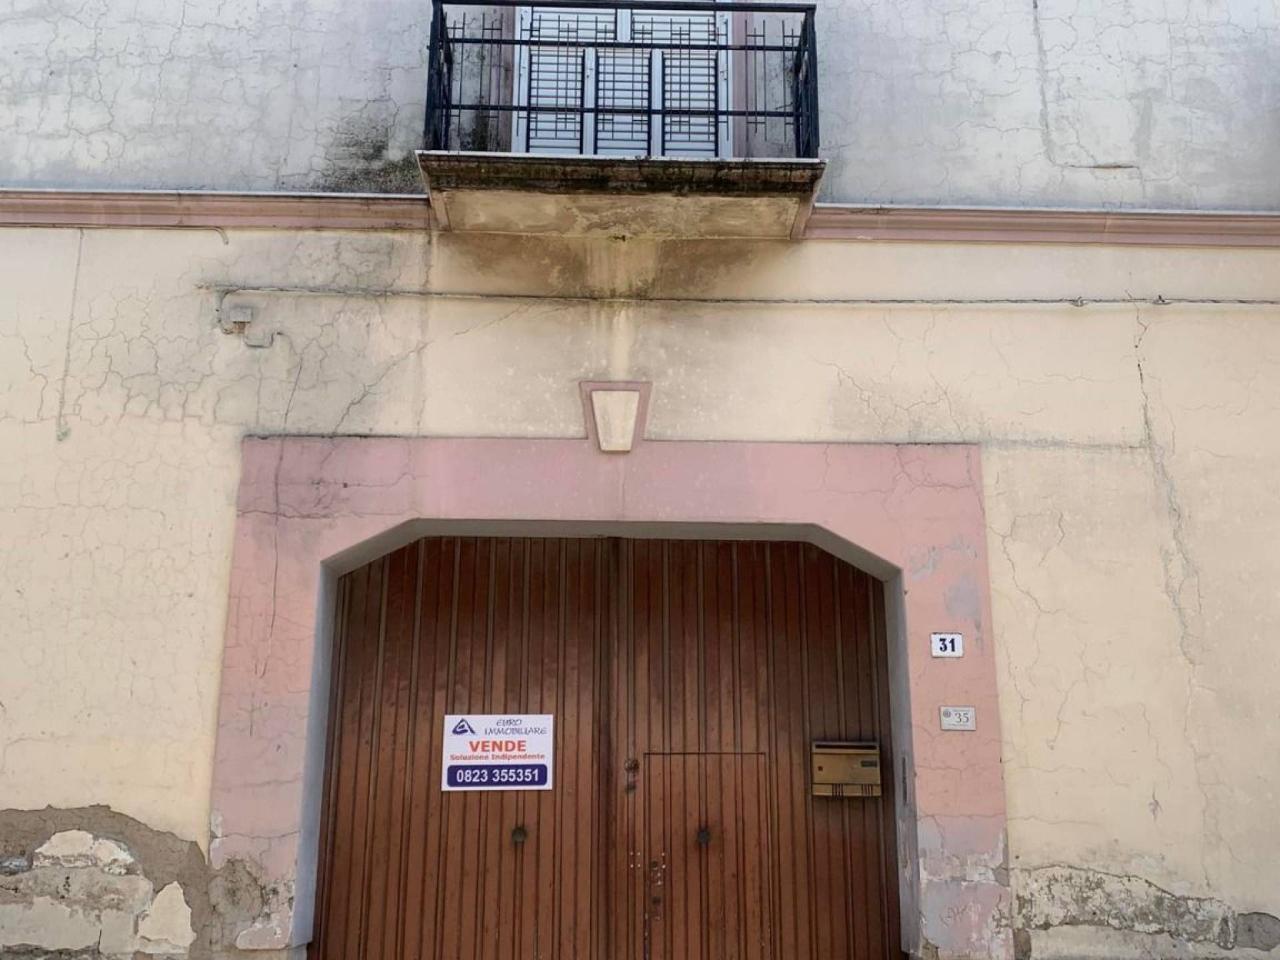 Palazzina commerciale in vendita a Marcianise